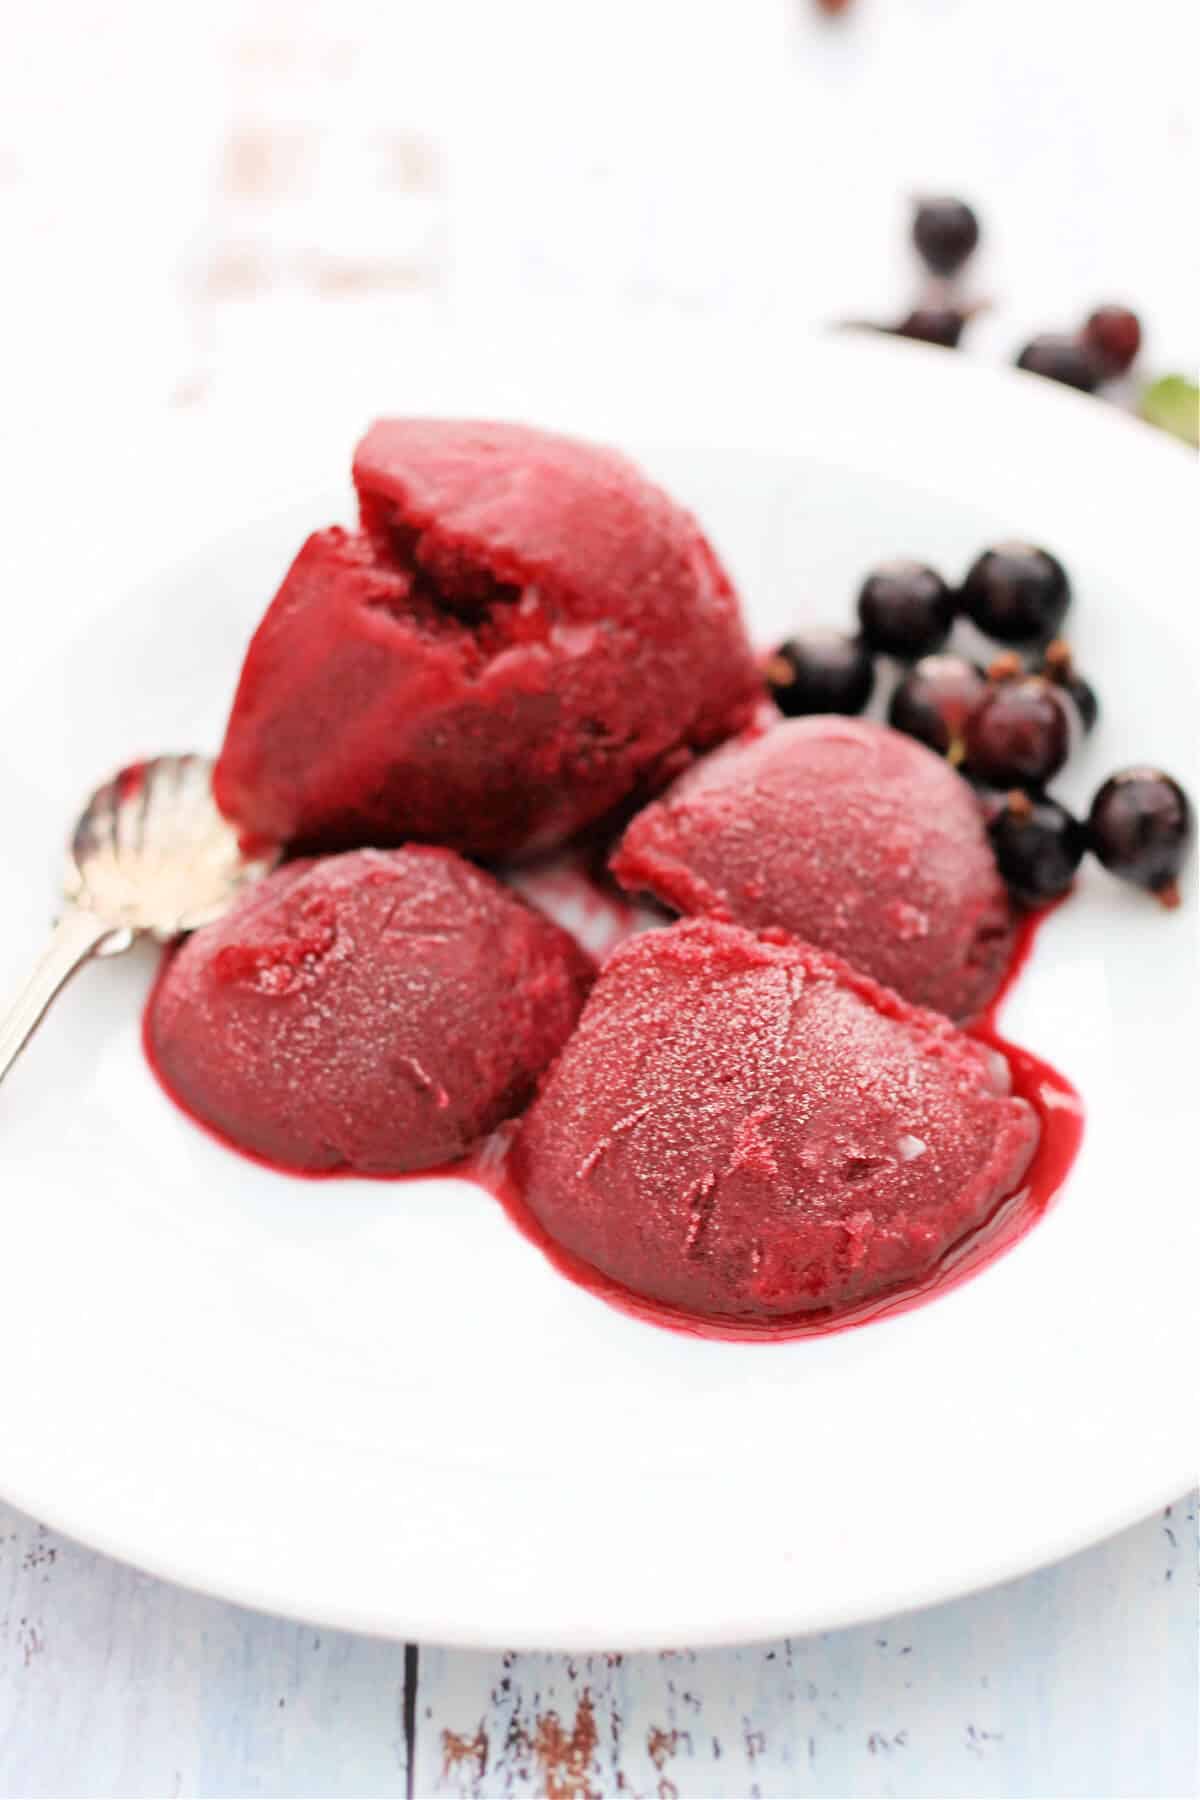 Four scoops of dark red sorbet on a white plate.